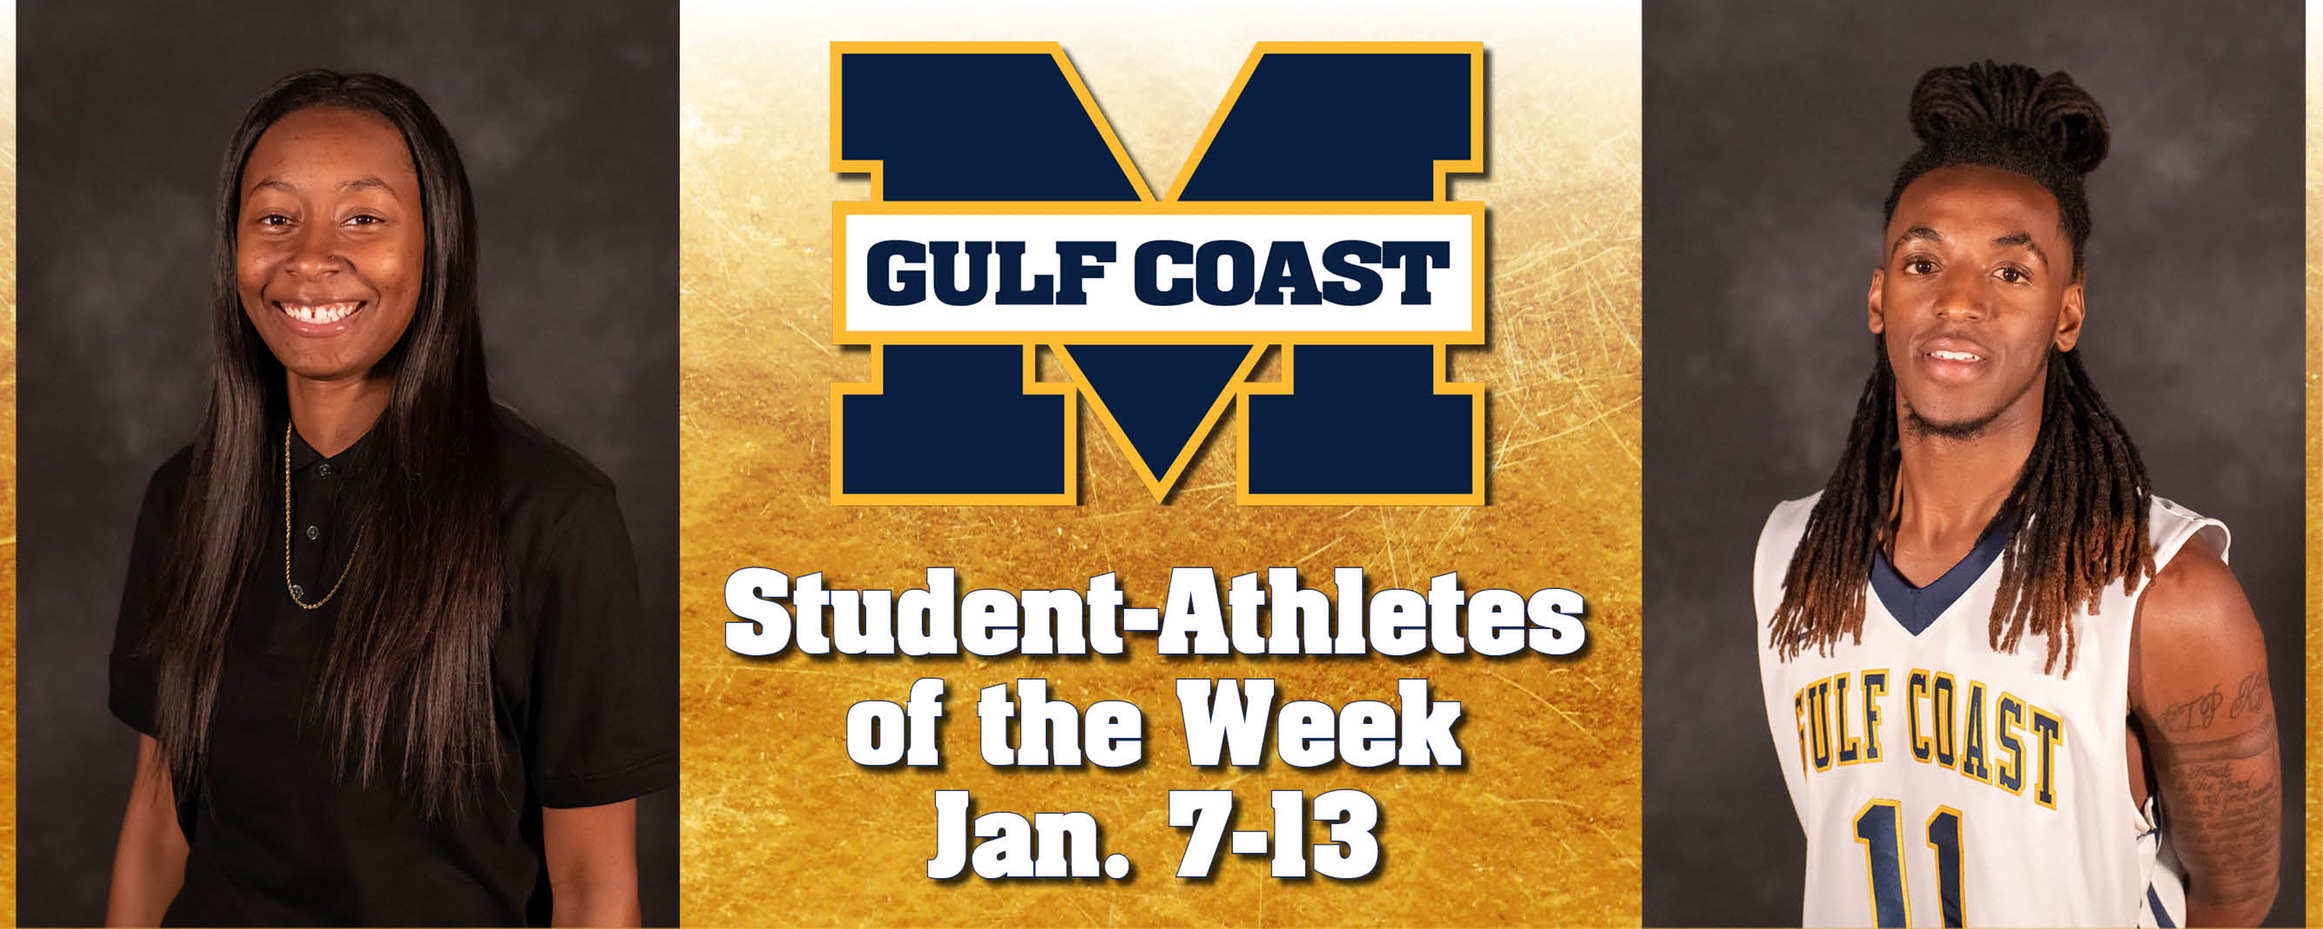 McCullah, Spivery named MGCCC Student-Athletes of the Week